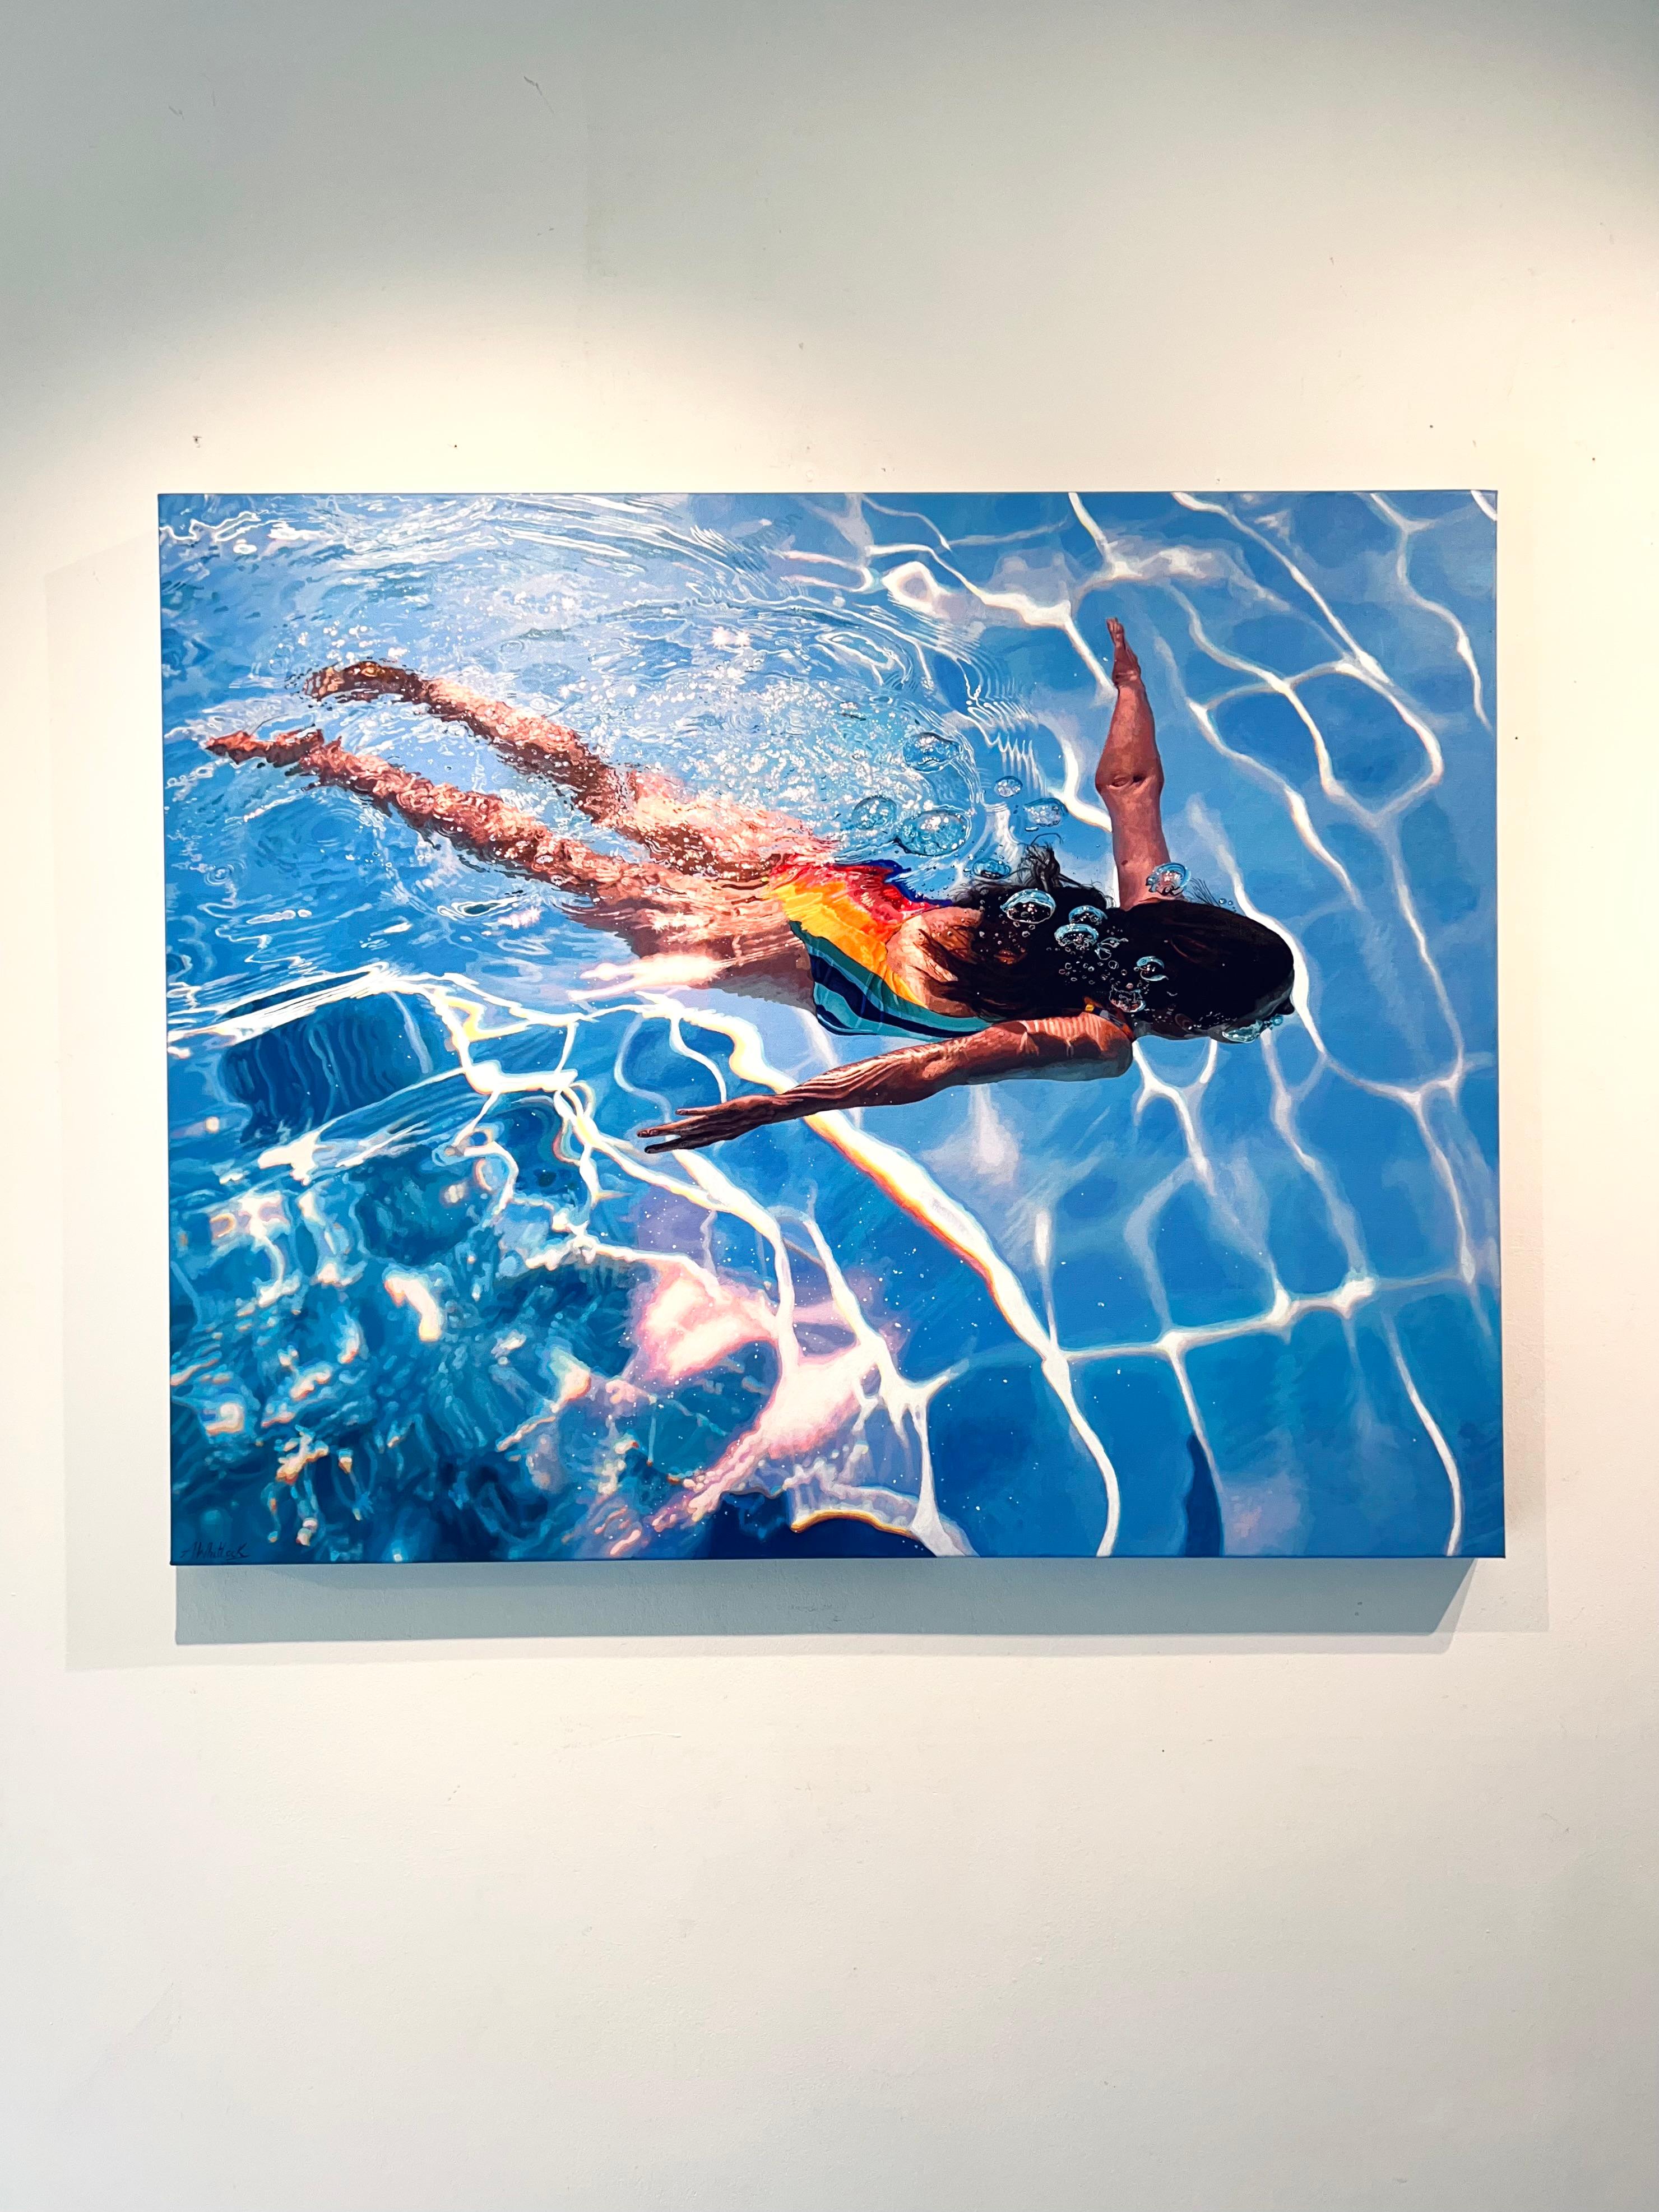 Unbound-original hyperrealistic figurative waterscape painting-contemporary art  - Painting by Abi Whitlock